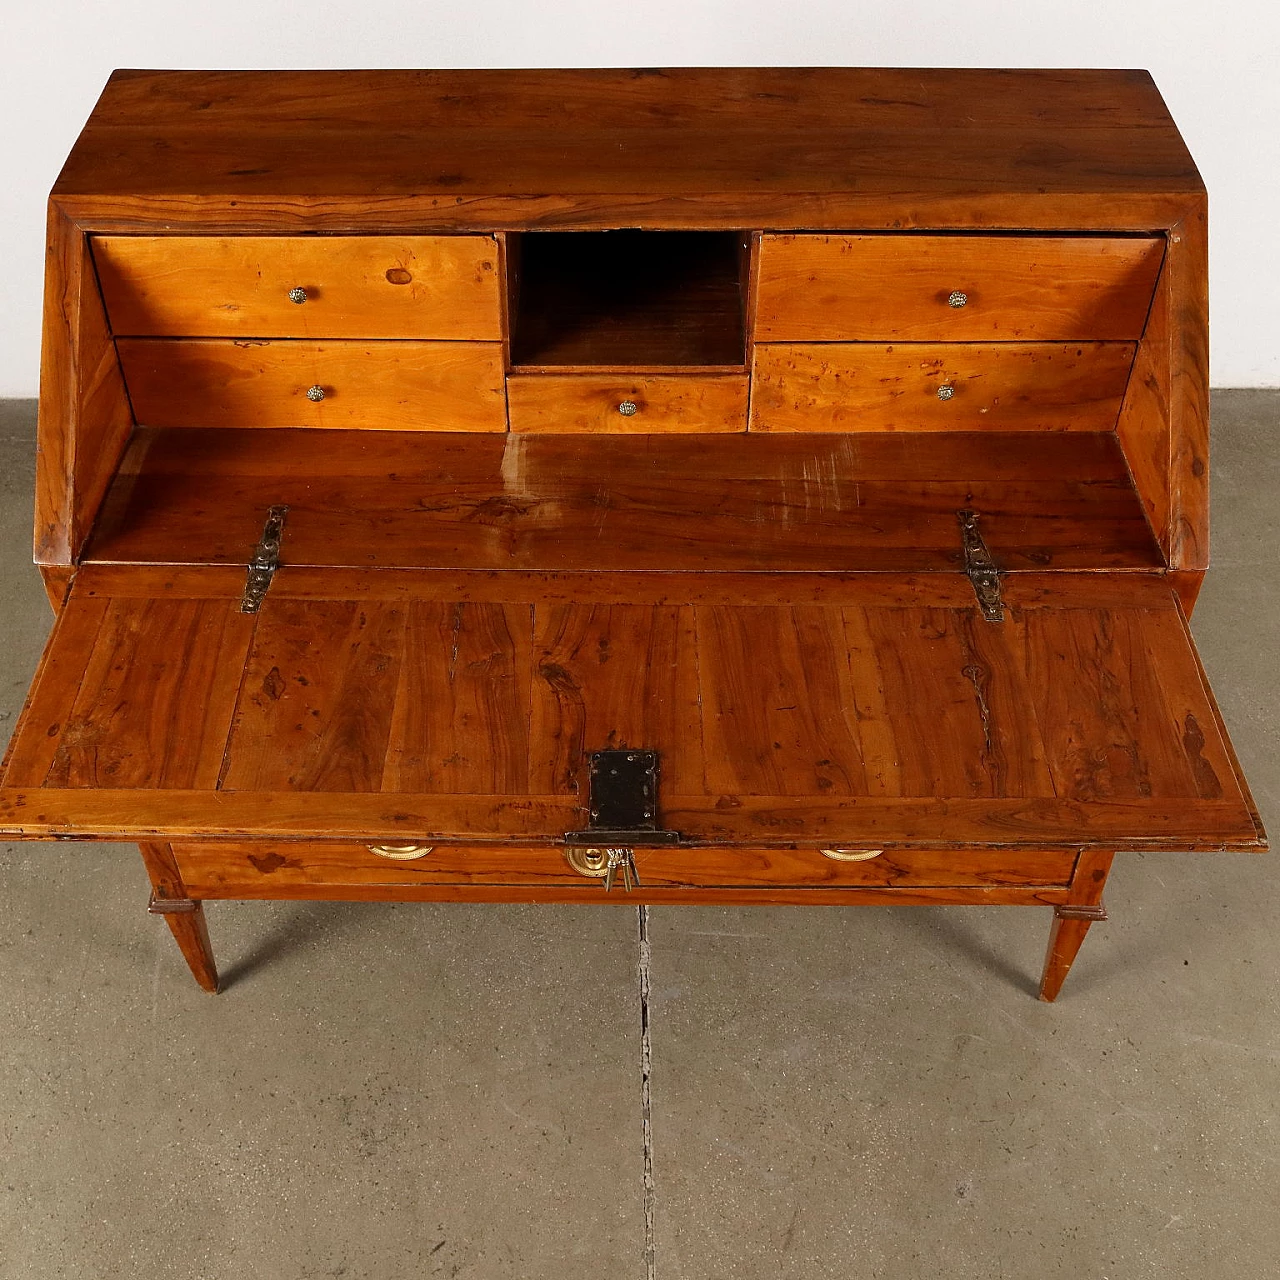 Flap desk with drawers in olive wood, 19 century 5